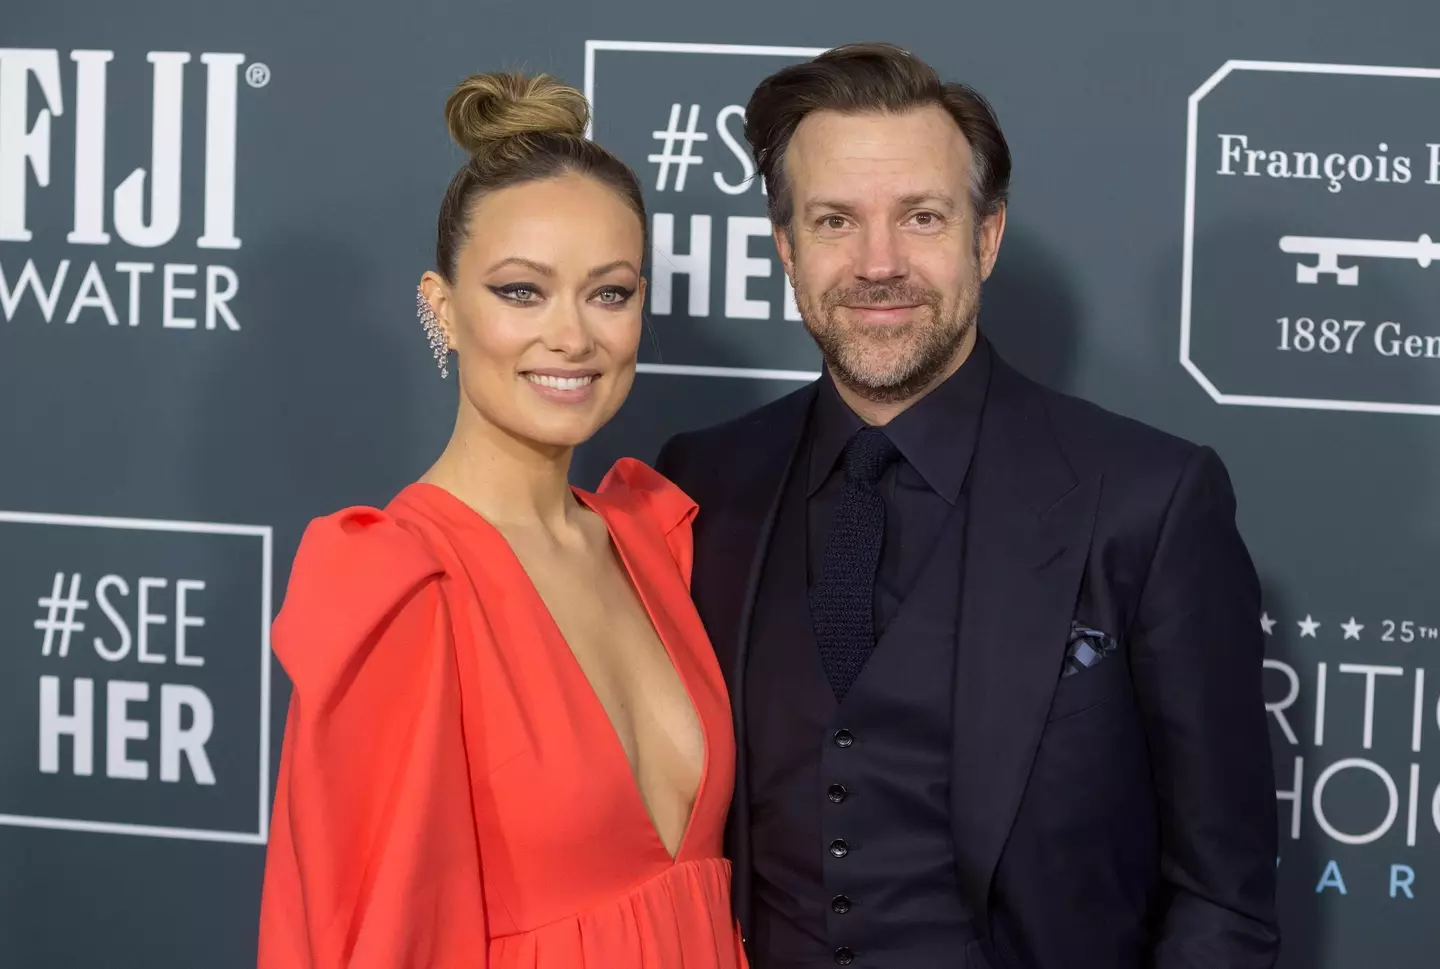 Olivia Wilde was served child custody papers by Jason Sudeikis while on stage at CinemaCon.